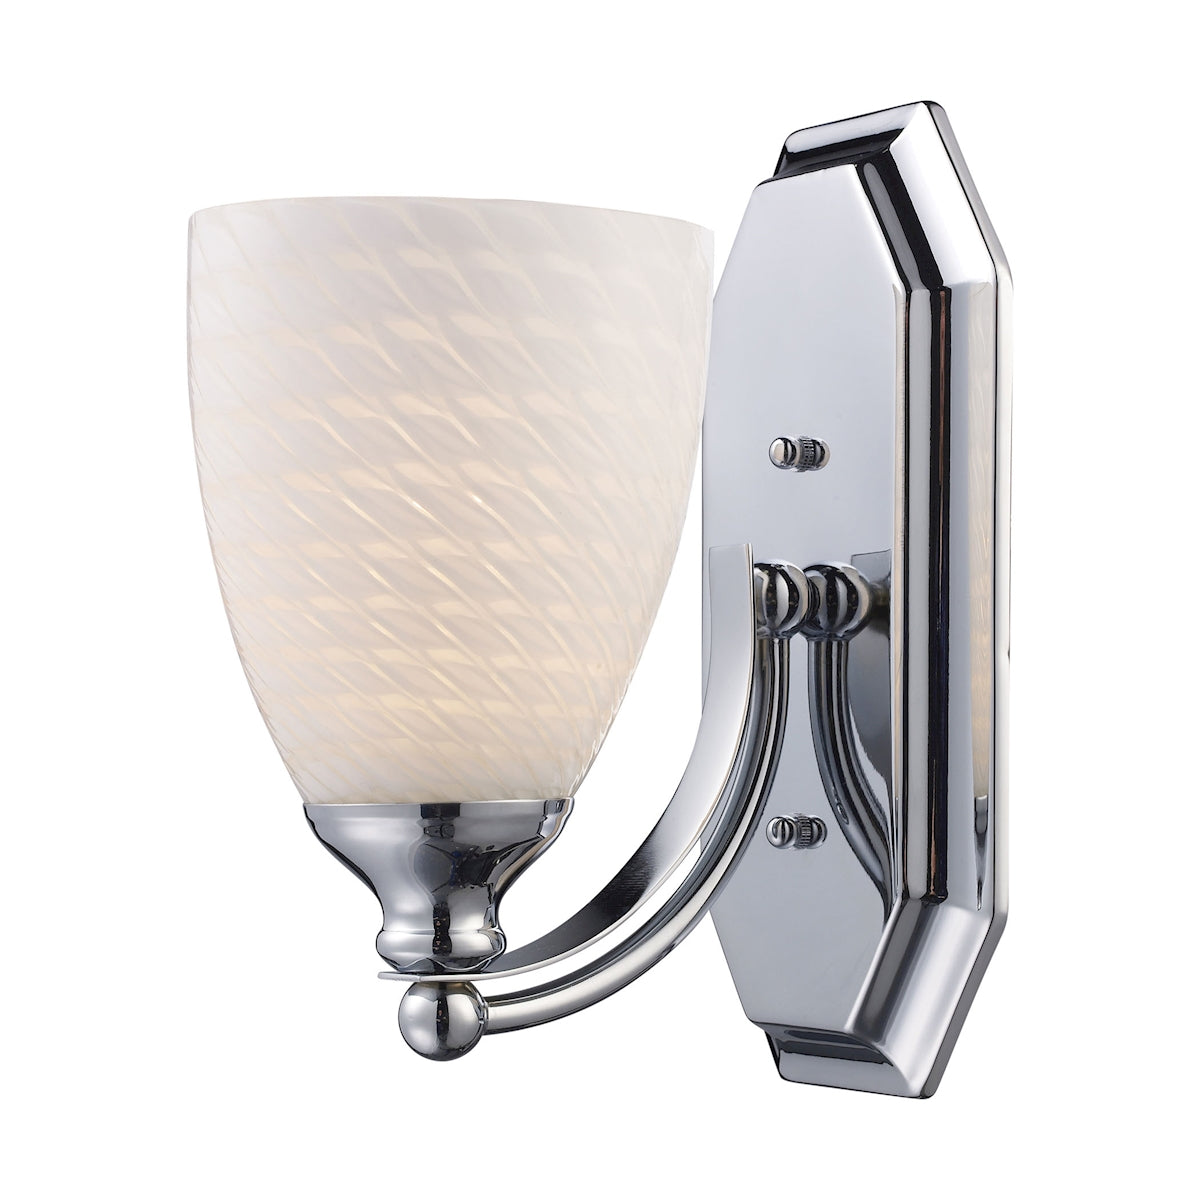 ELK Lighting 570-1C-WS - Mix and Match Vanity 5" Wide 1-Light Vanity Light in Chrome with White Swir